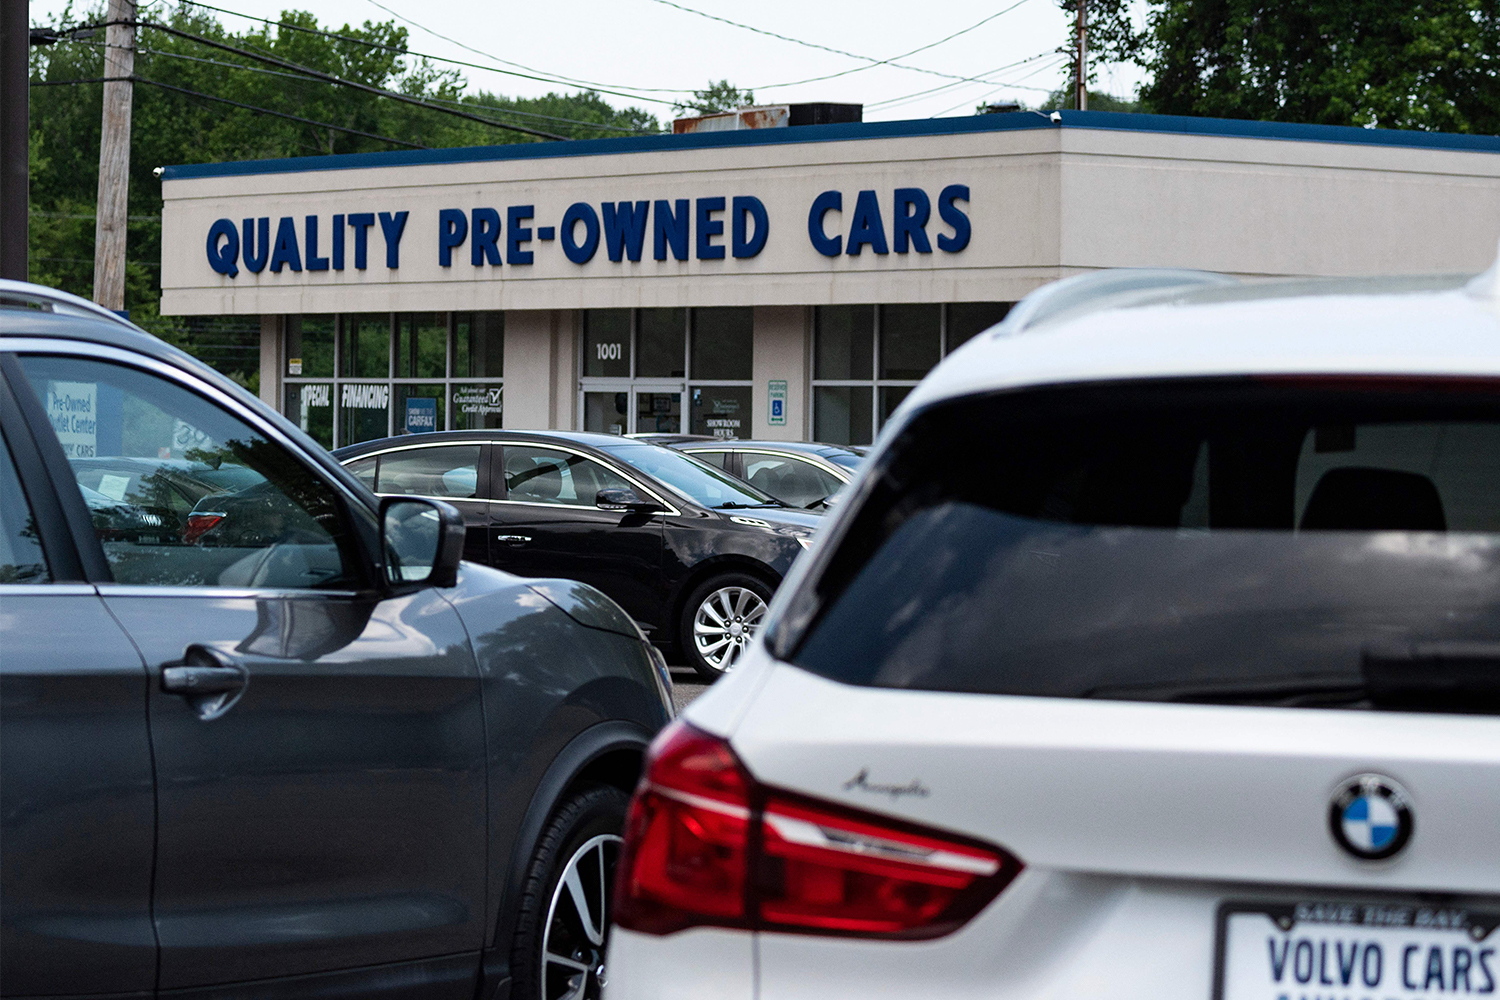 A white BMW seen in the foreground of a photo of a used car dealership lot in Annapolis, Maryland on May 27, 2021